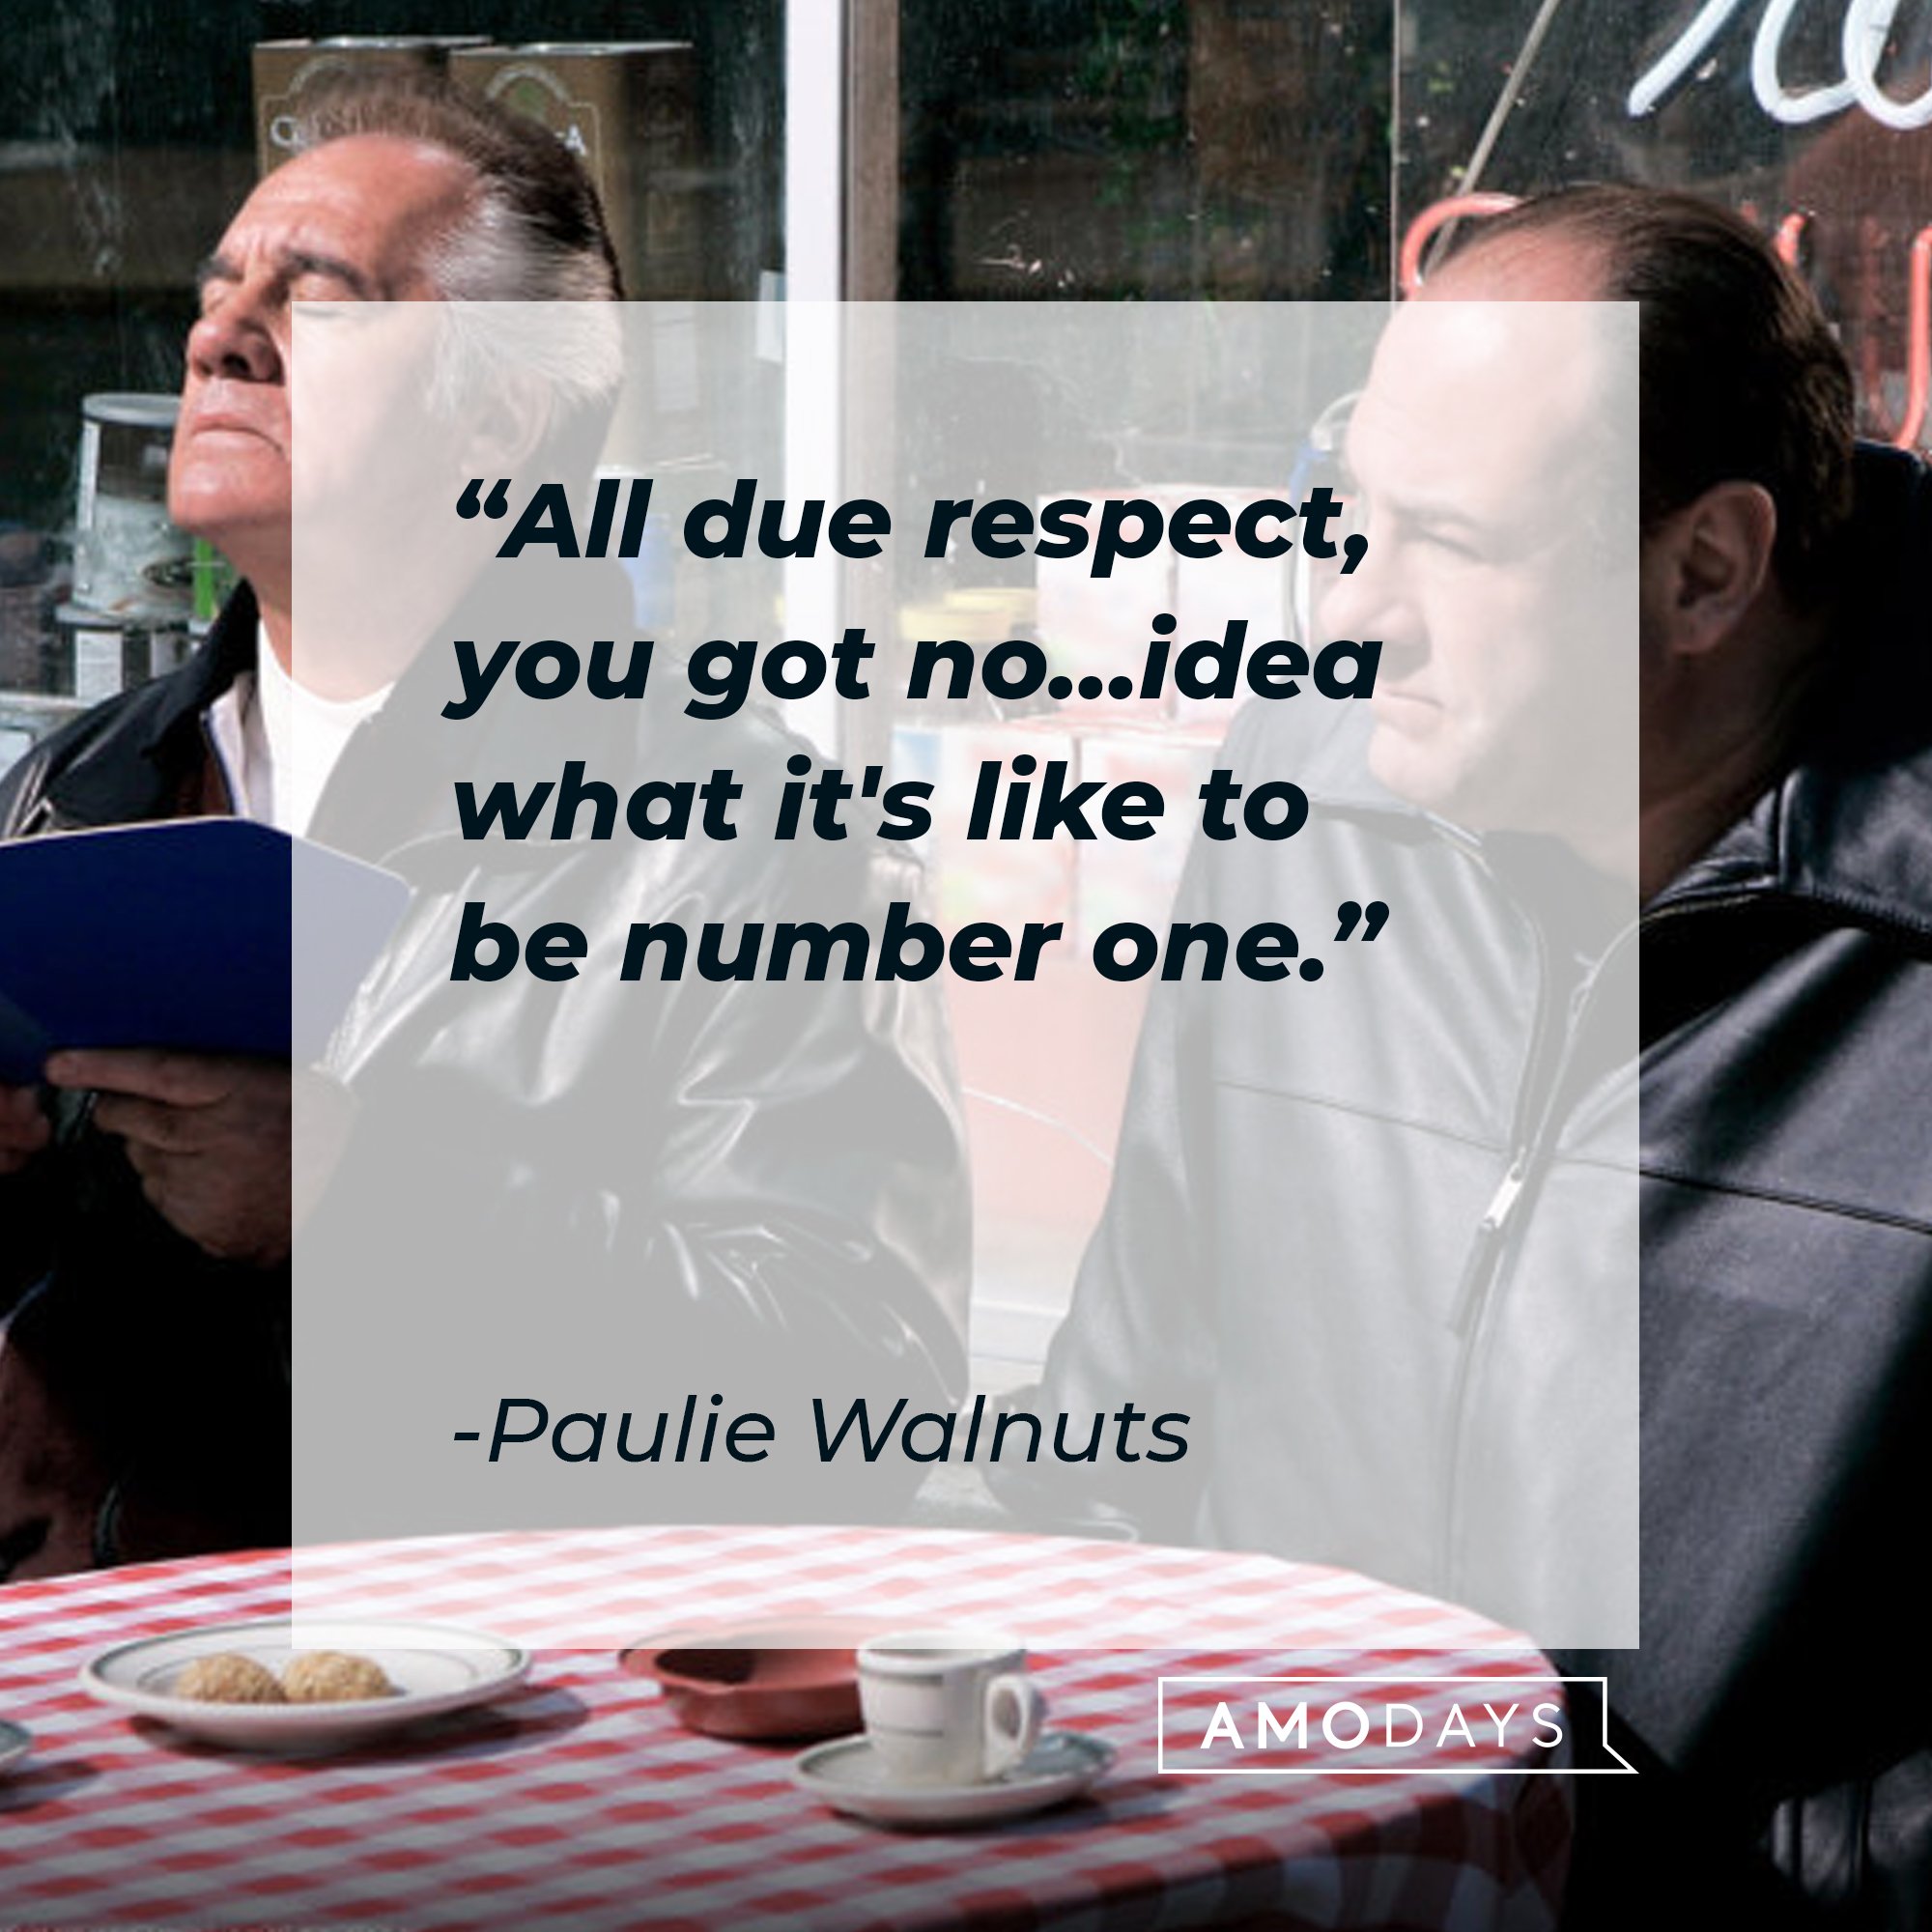 Paulie Walnuts' quote: "All due respect, you got no…idea what it's like to be number one." | Image: AmoDays 